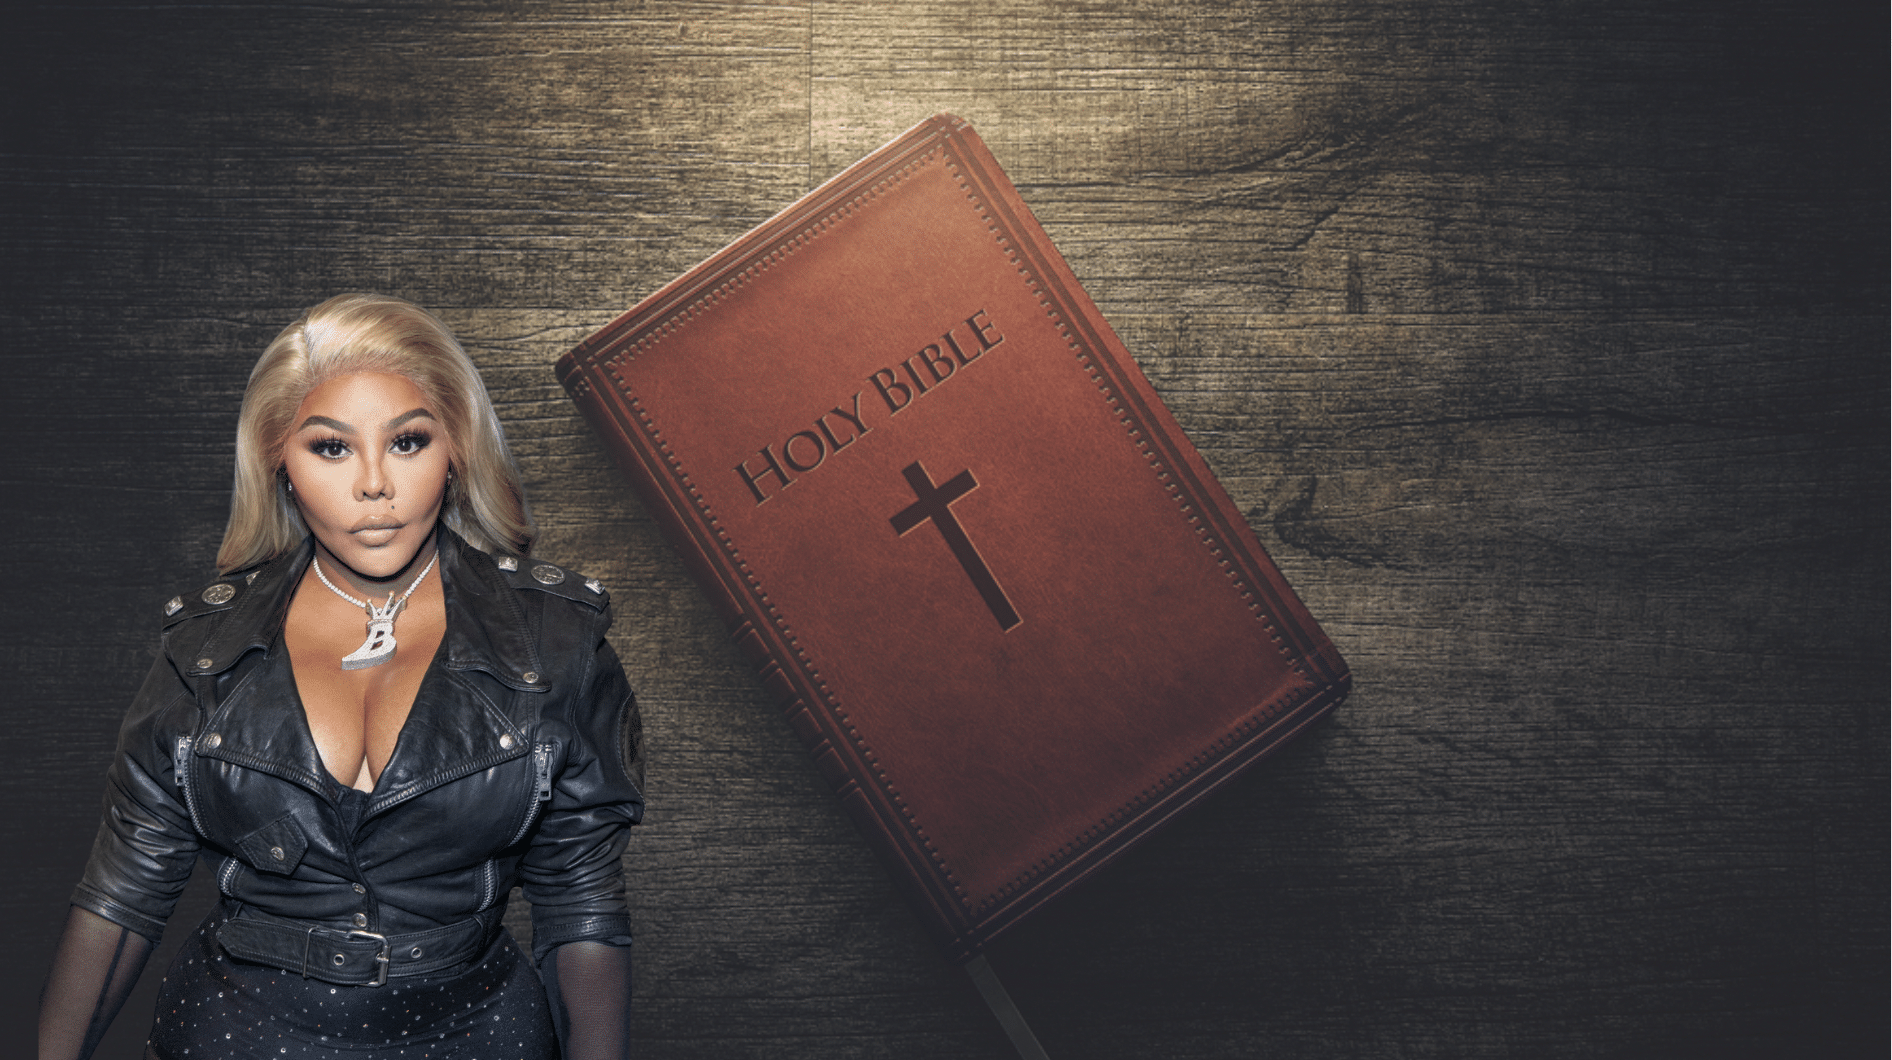 Lil Kim claims her new Memoir will outsell the Bible